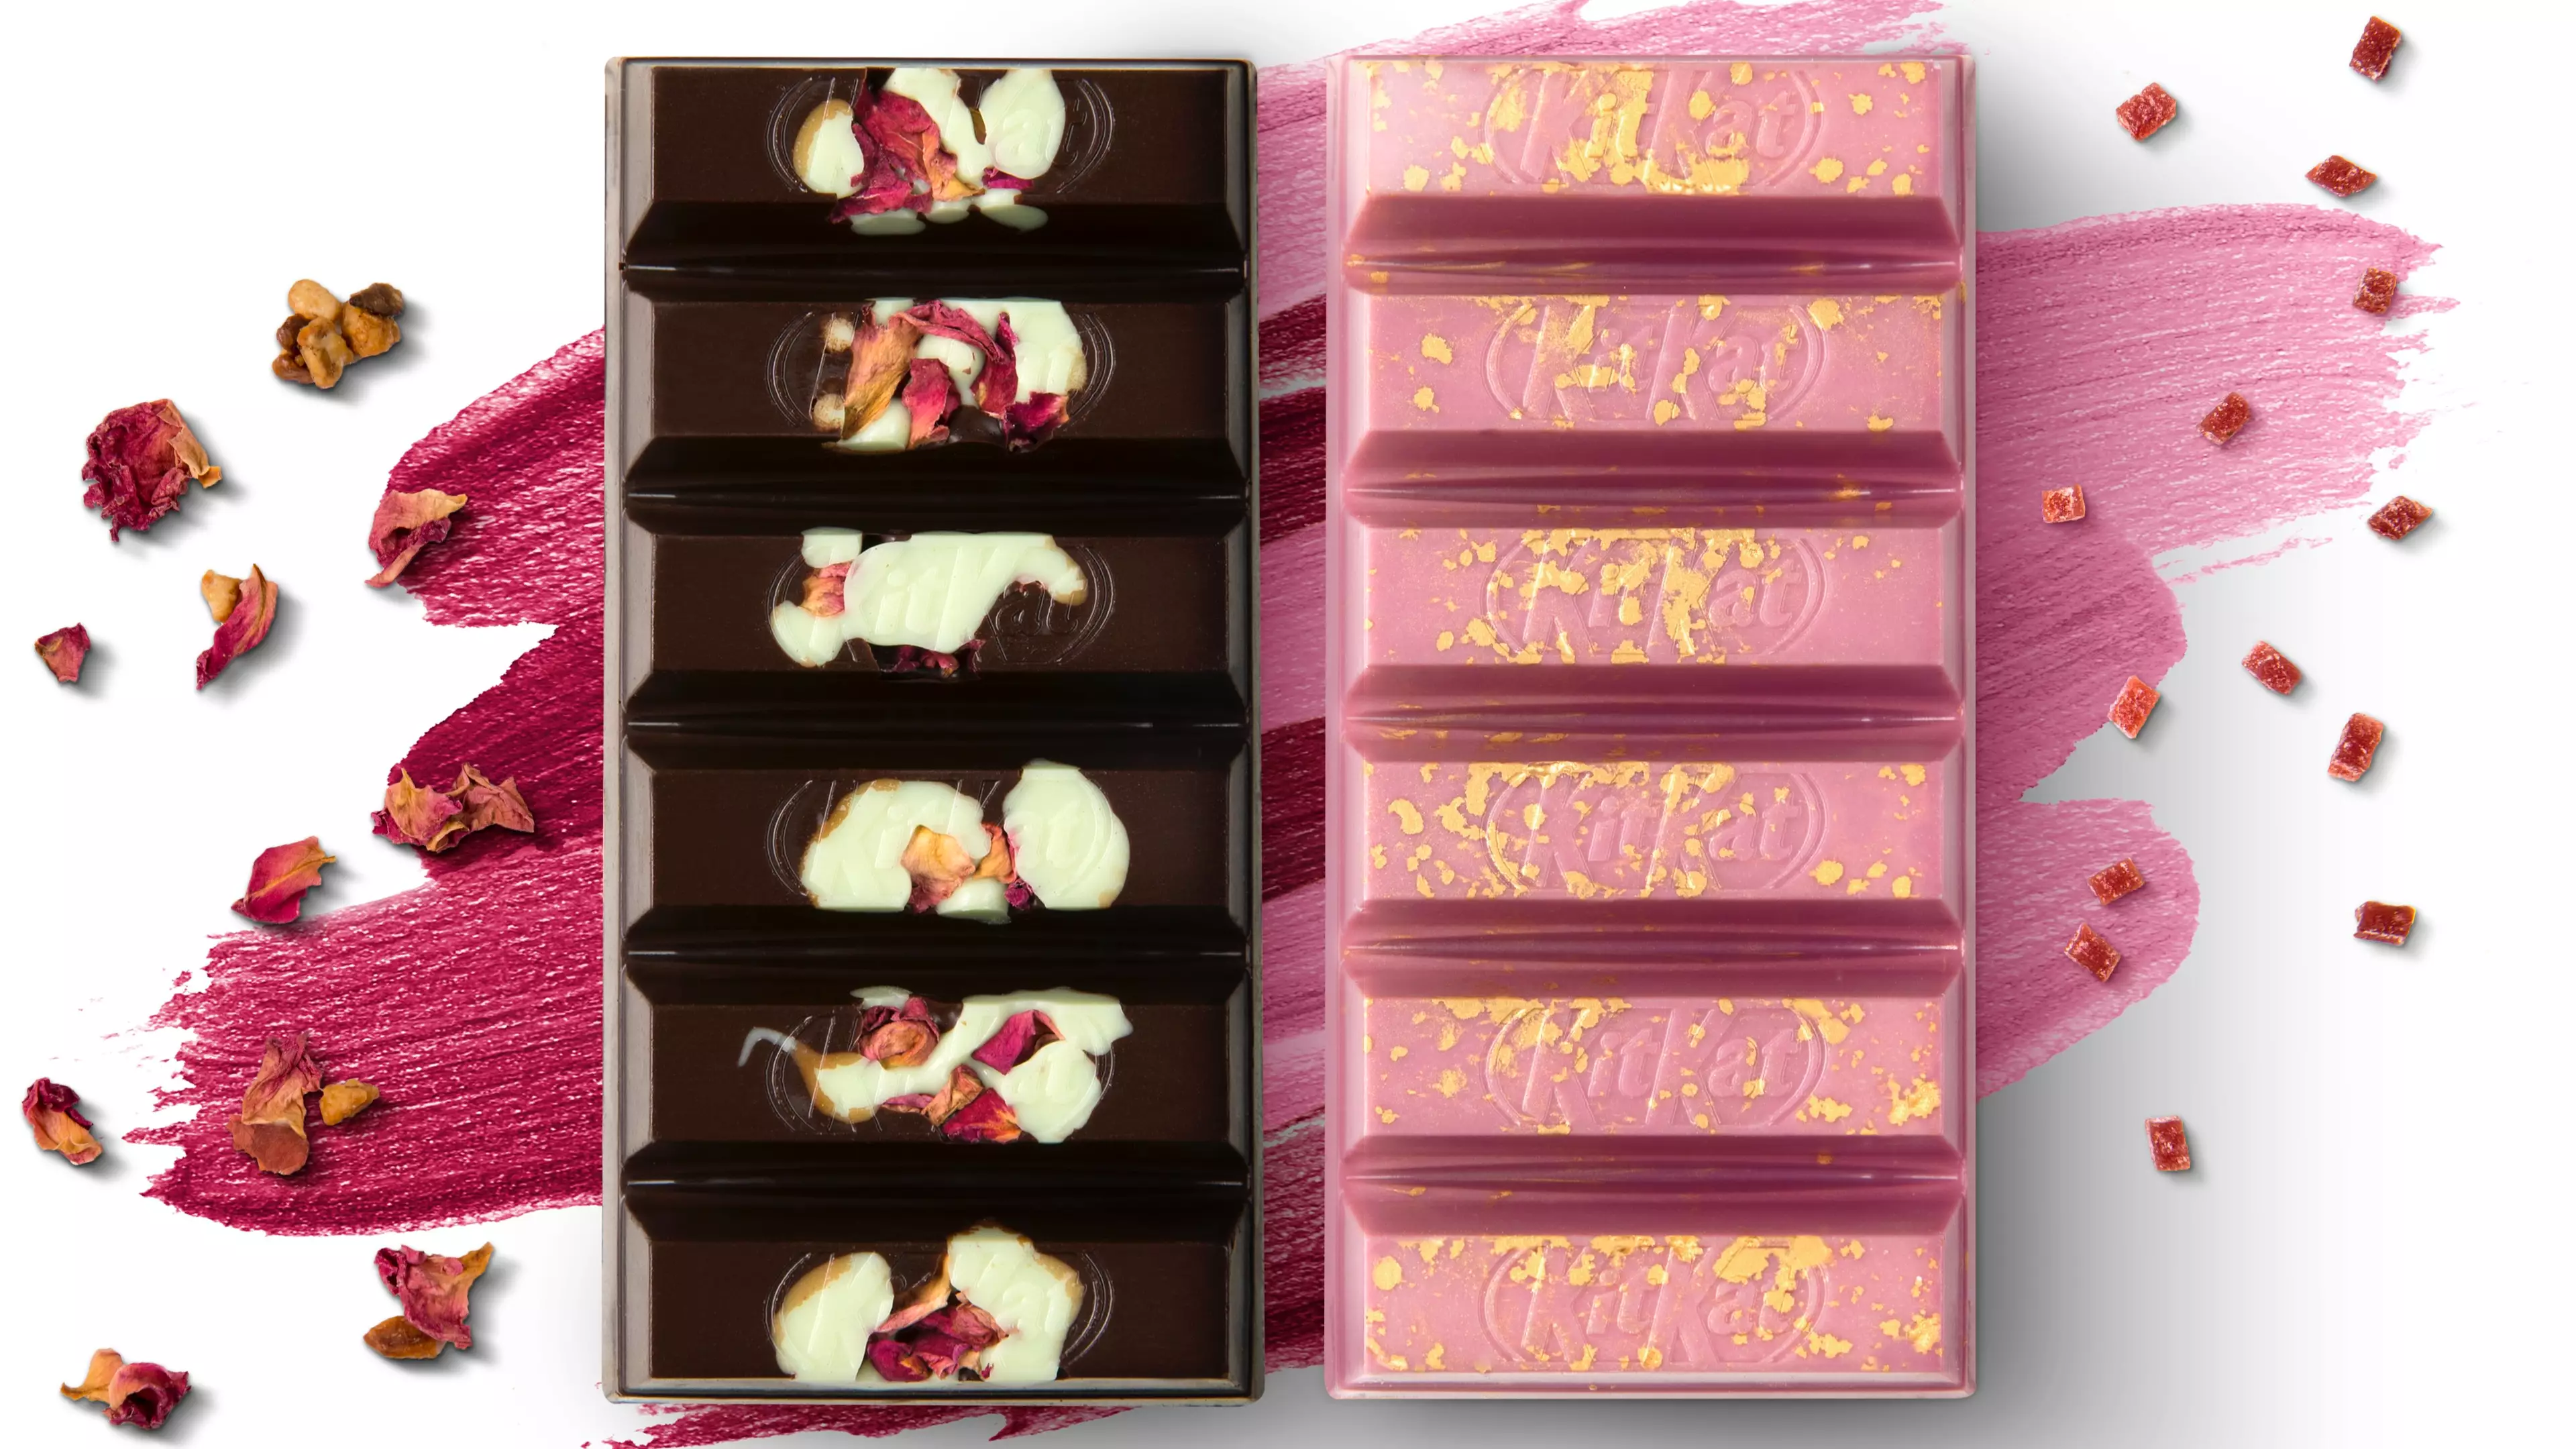 You Can Now Design Bespoke Flavour KitKats Including British Favourites Like Bakewell Tart